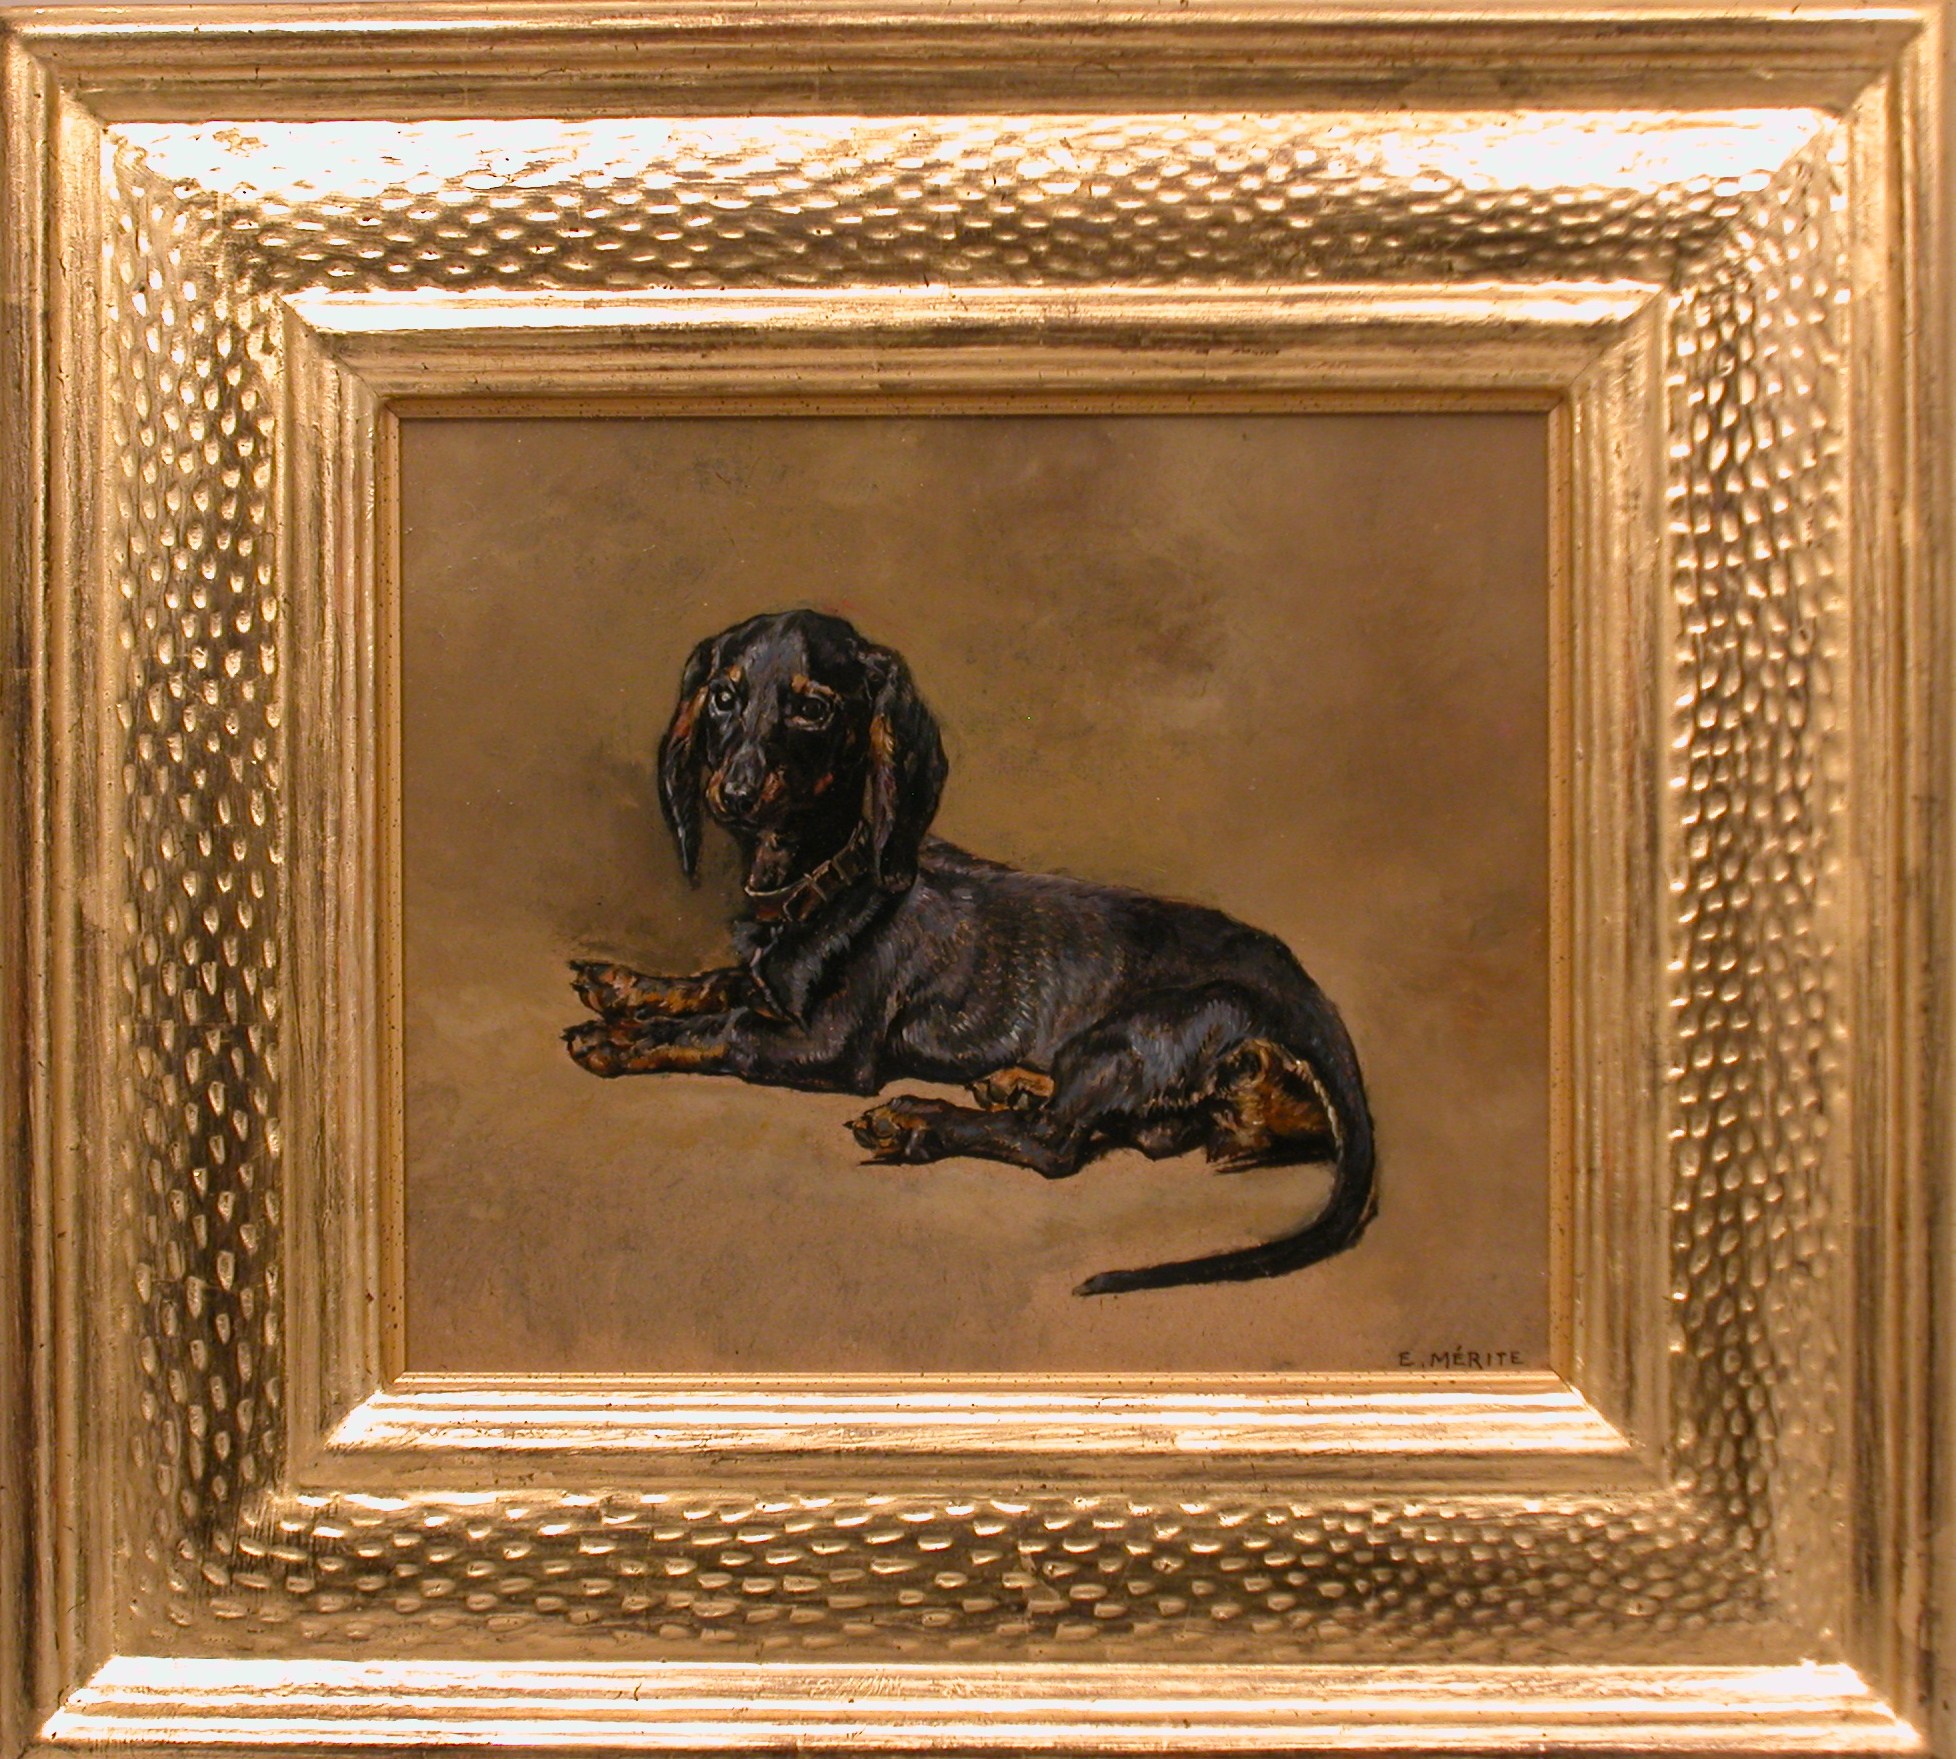 Click for larger image: Oil on canvas of a Dachshund by Edouard Paul Merite - Oil on canvas of a Dachshund by Edouard Paul Merite